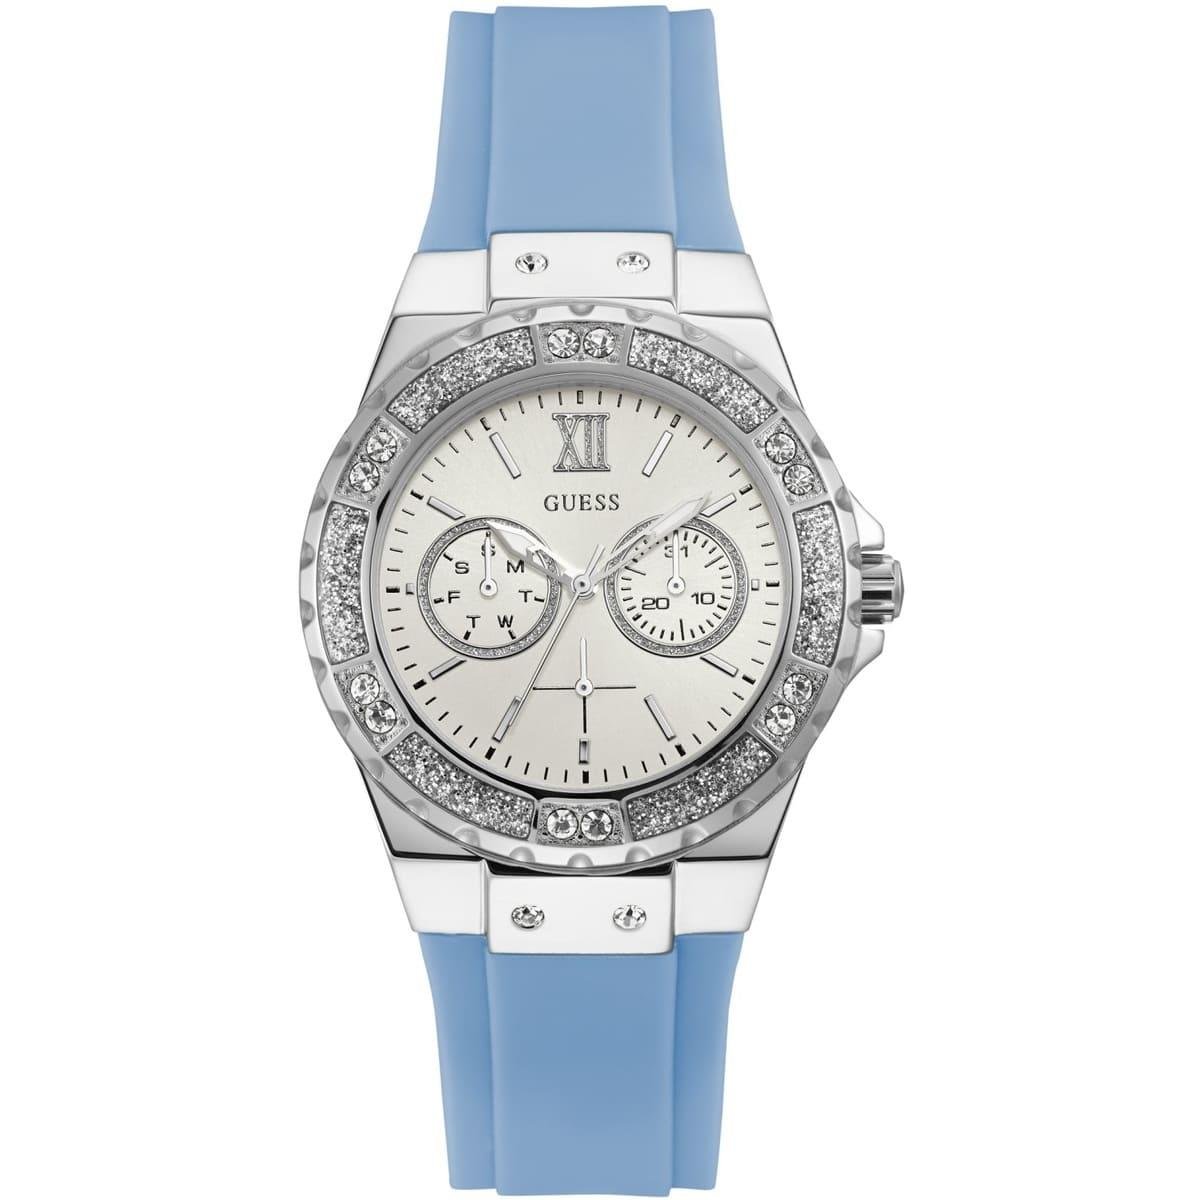 ĐỒNG HỒ NỮ GUESS BLUE SILICON LIMELIGHT WOMEN WATCH W1053L5 2